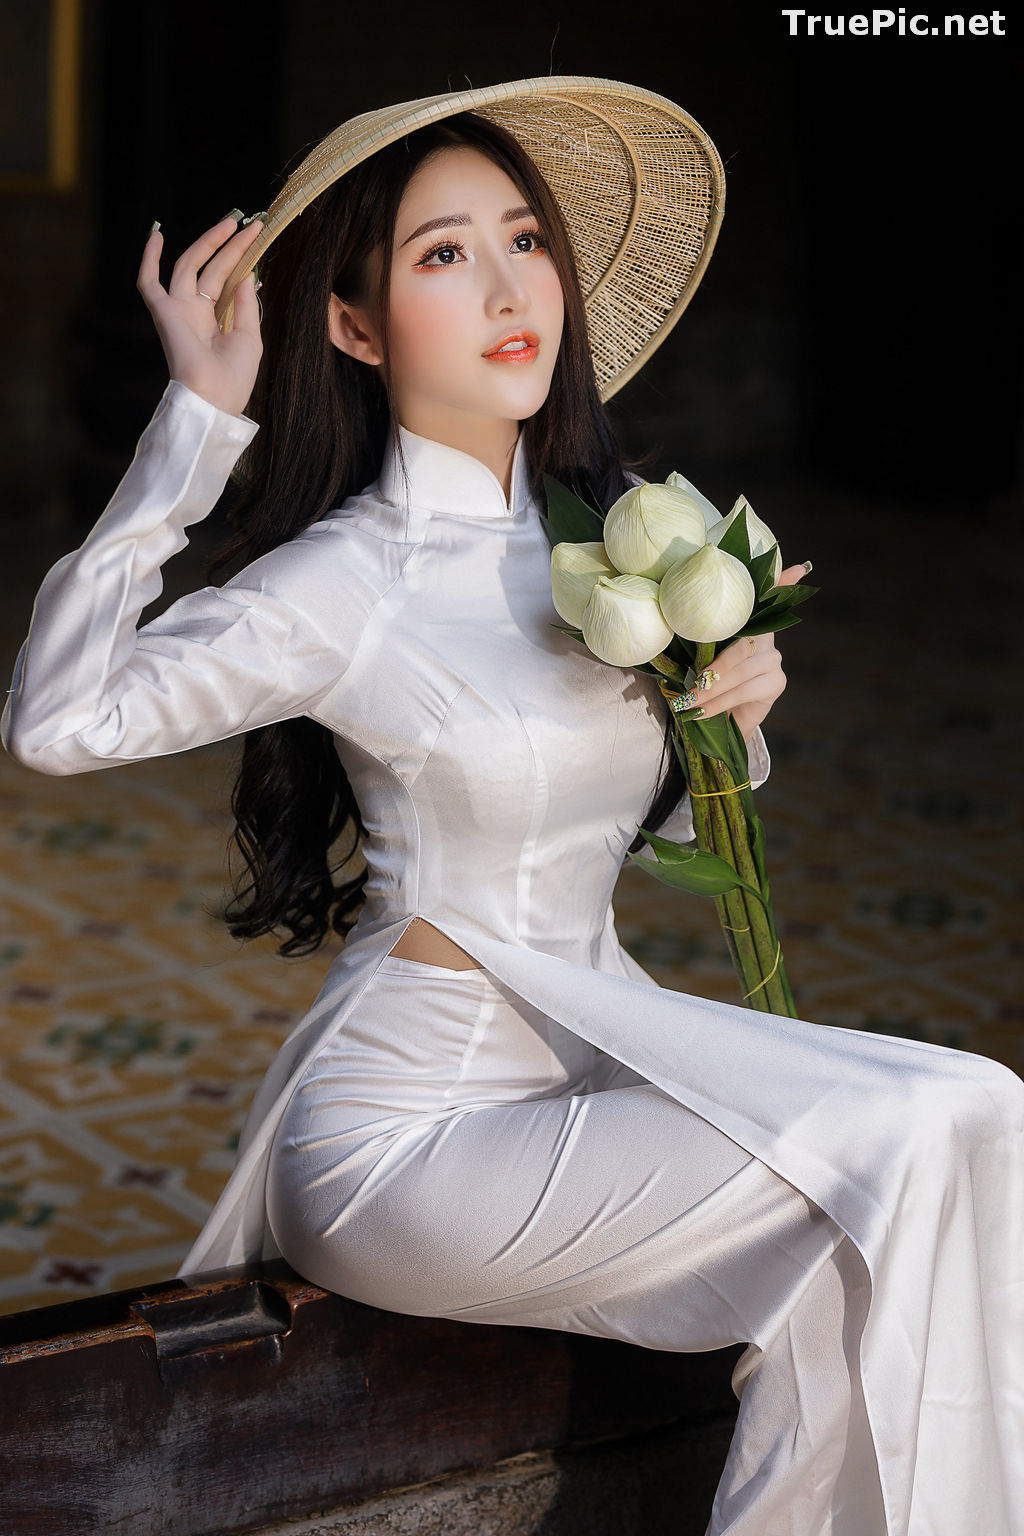 The Beauty of Vietnamese Girls with Traditional Dress (Ao Dai) #2